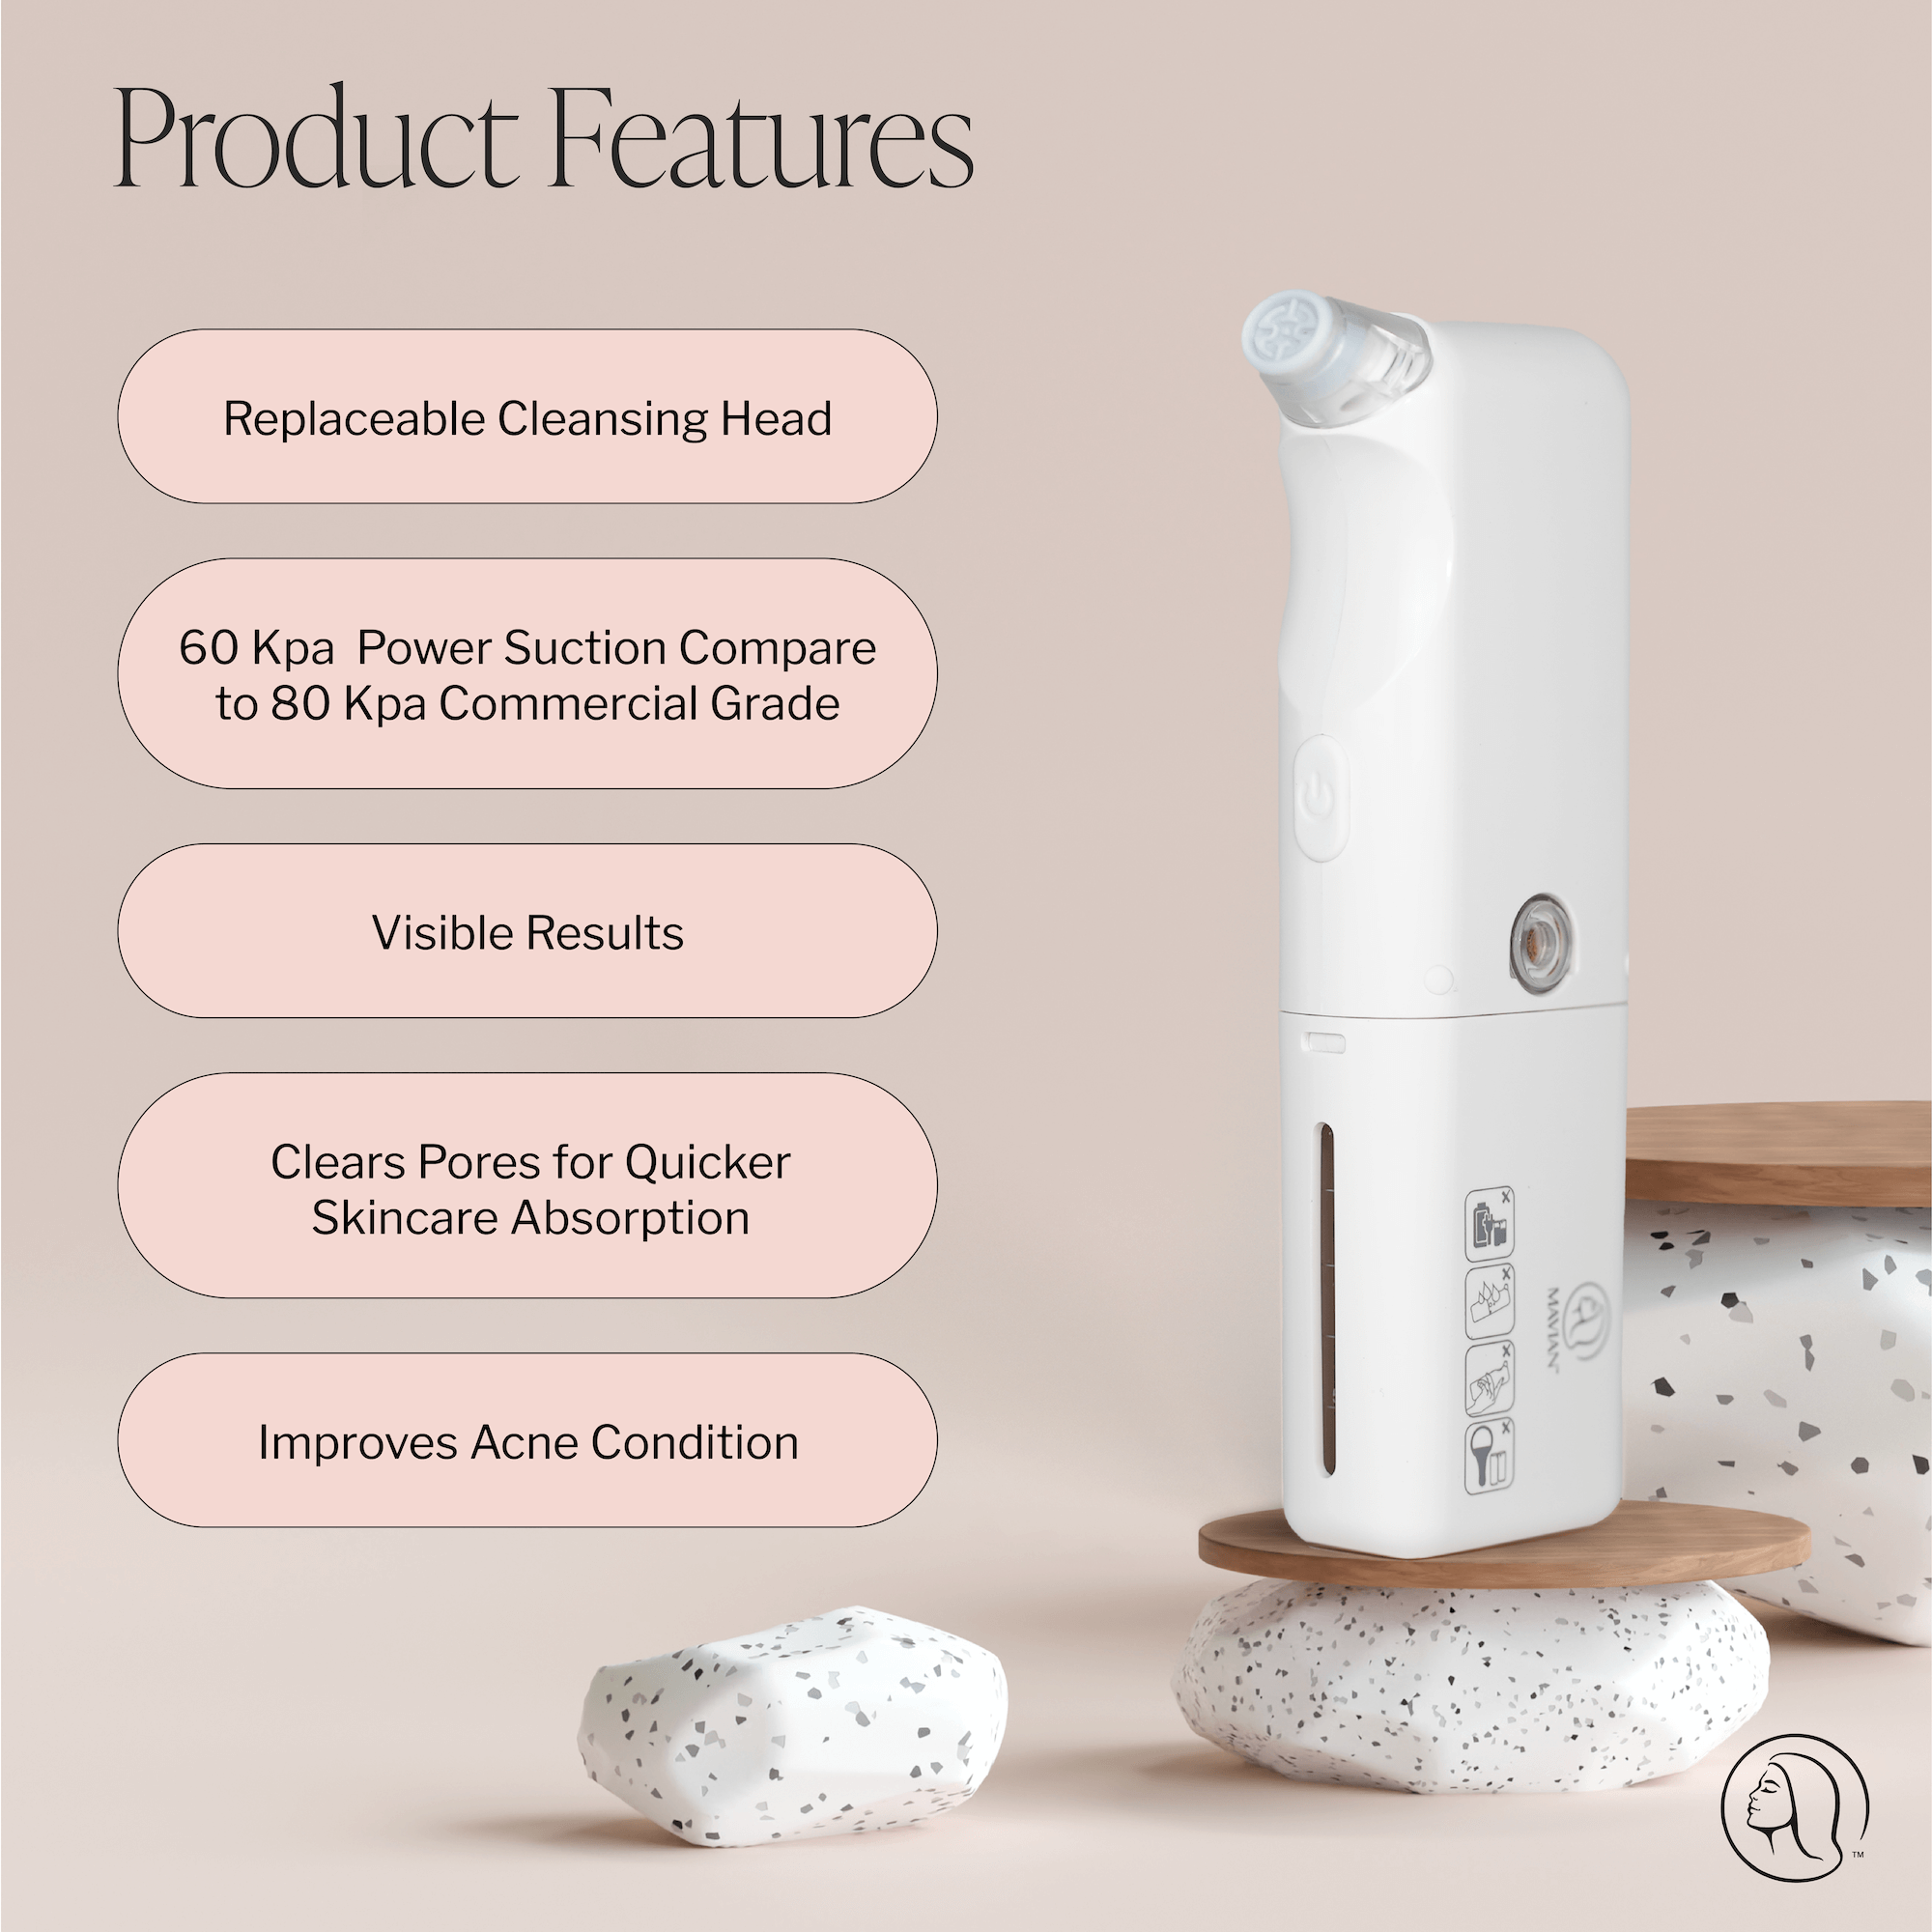 Pore cleansing with vaccum technology home device